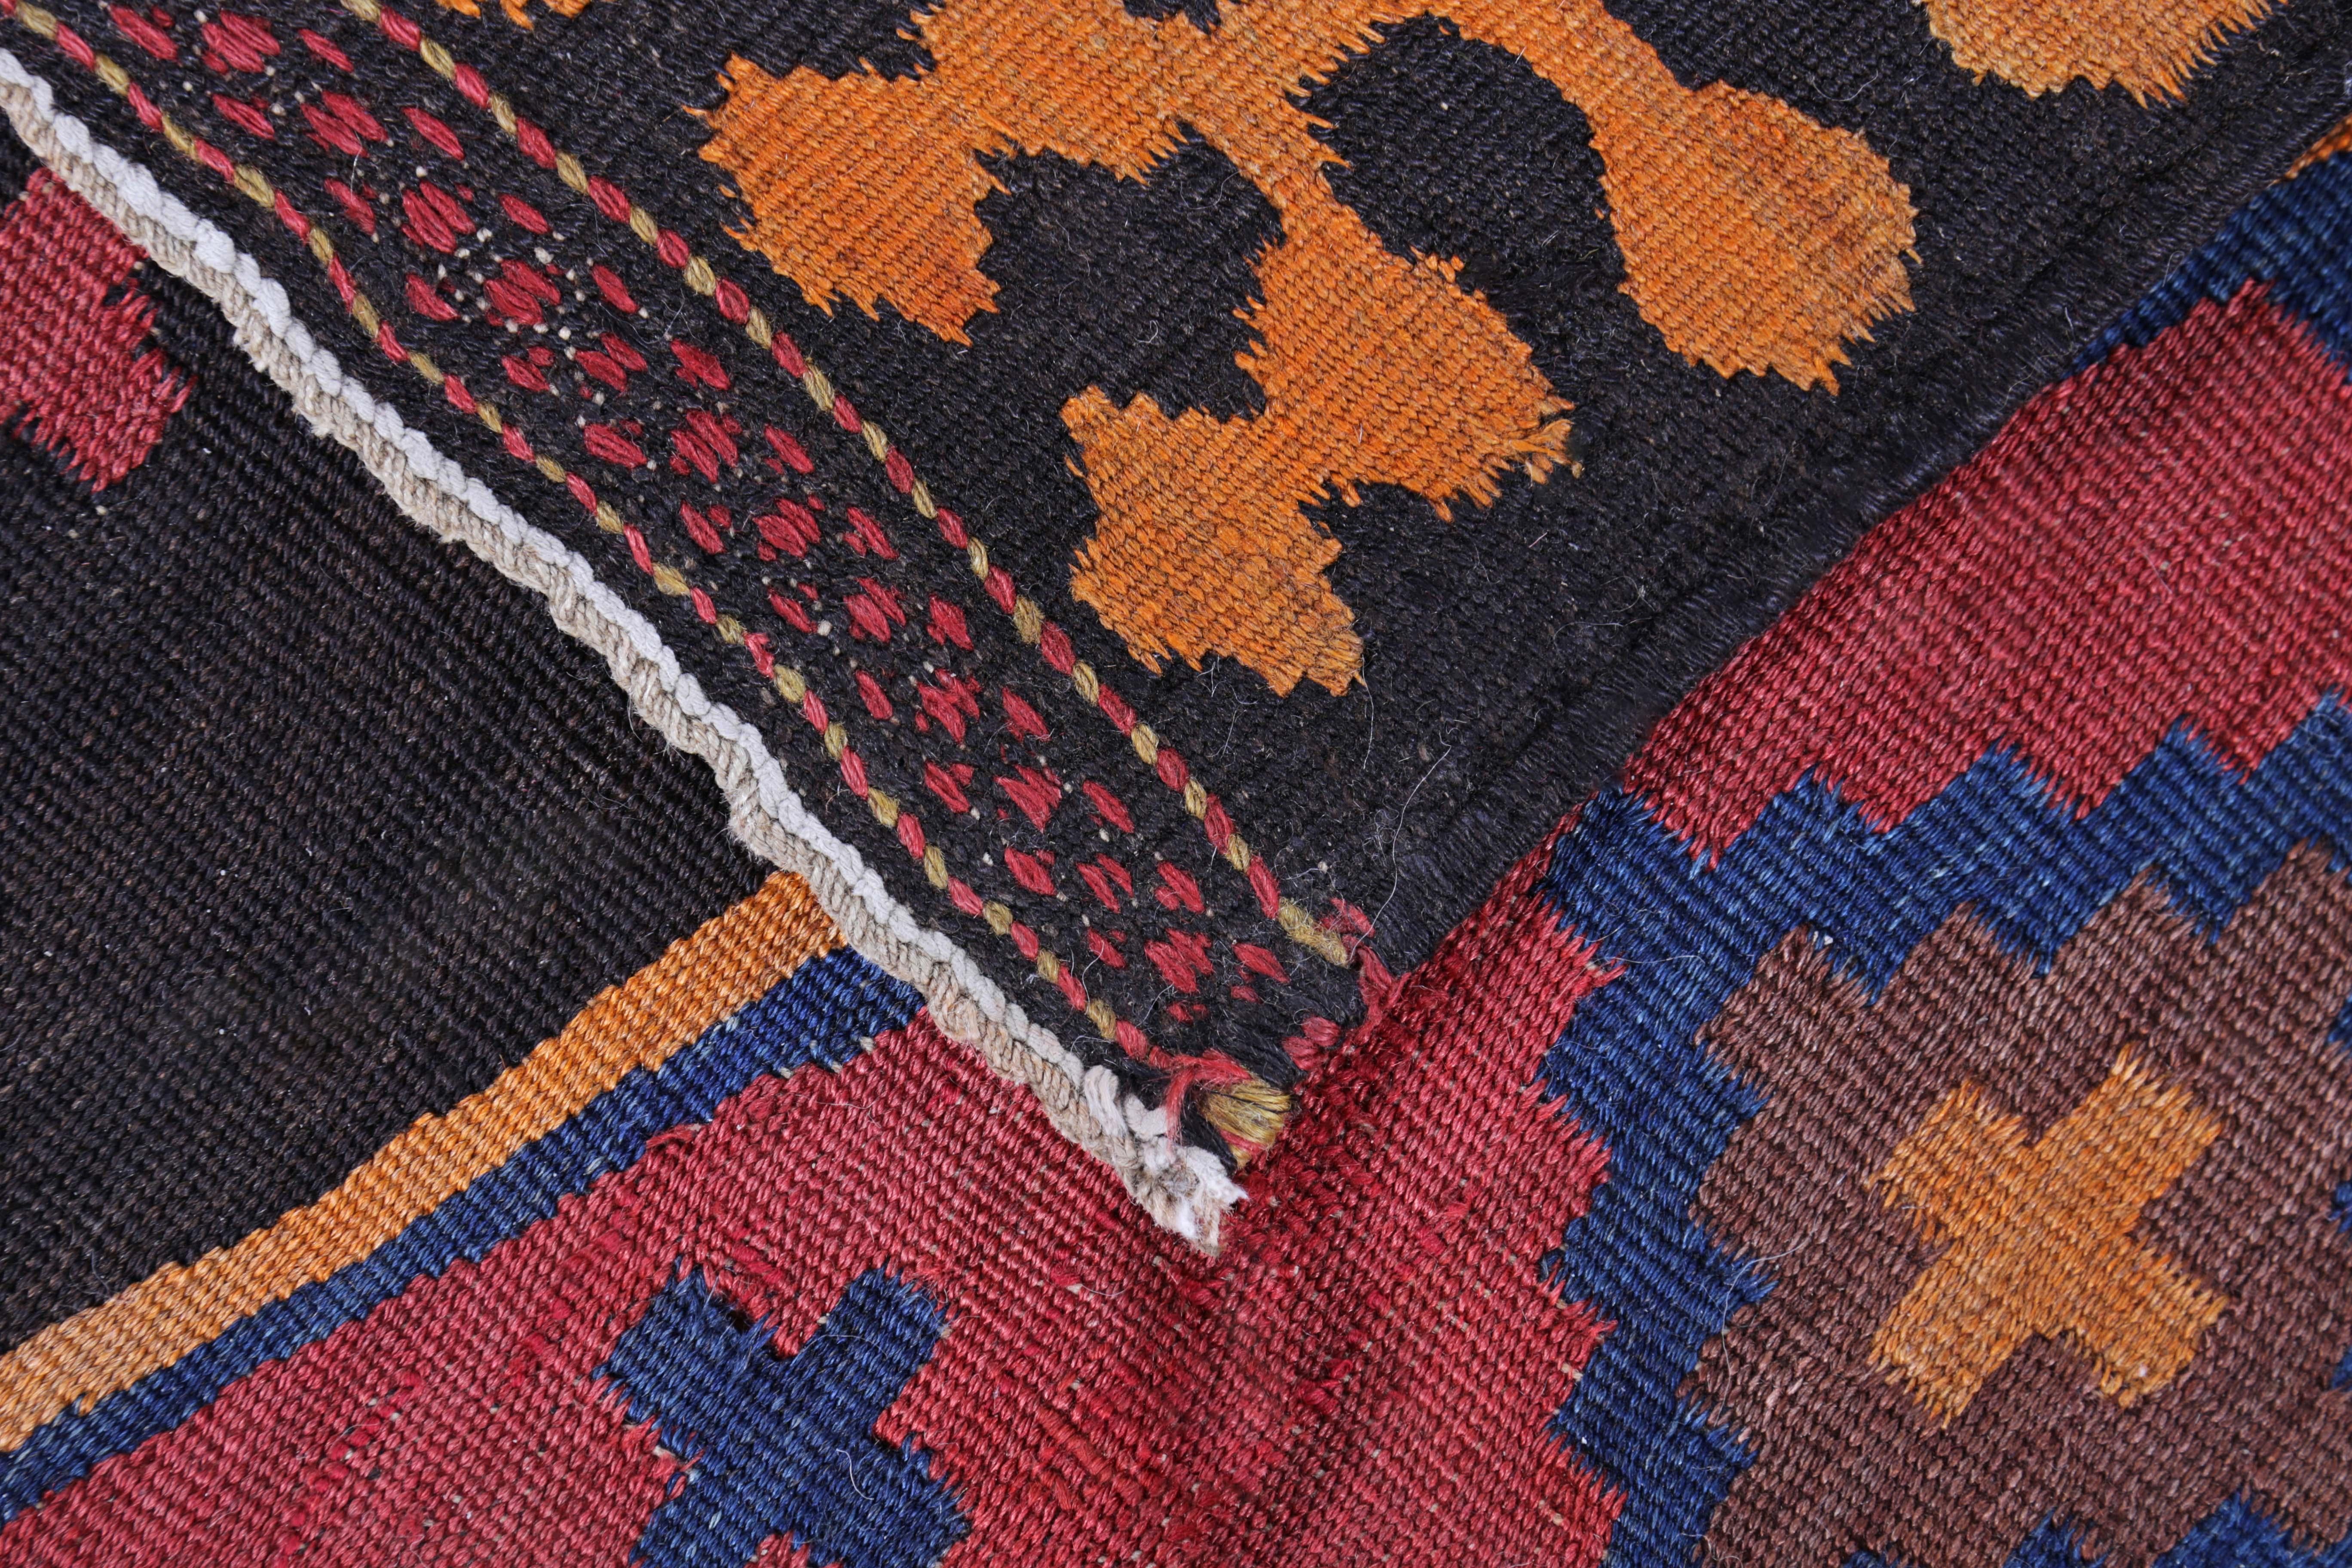 Hand-Woven Turkish Kilim Runner Rug with Tribal Details in Red, Orange and Black For Sale